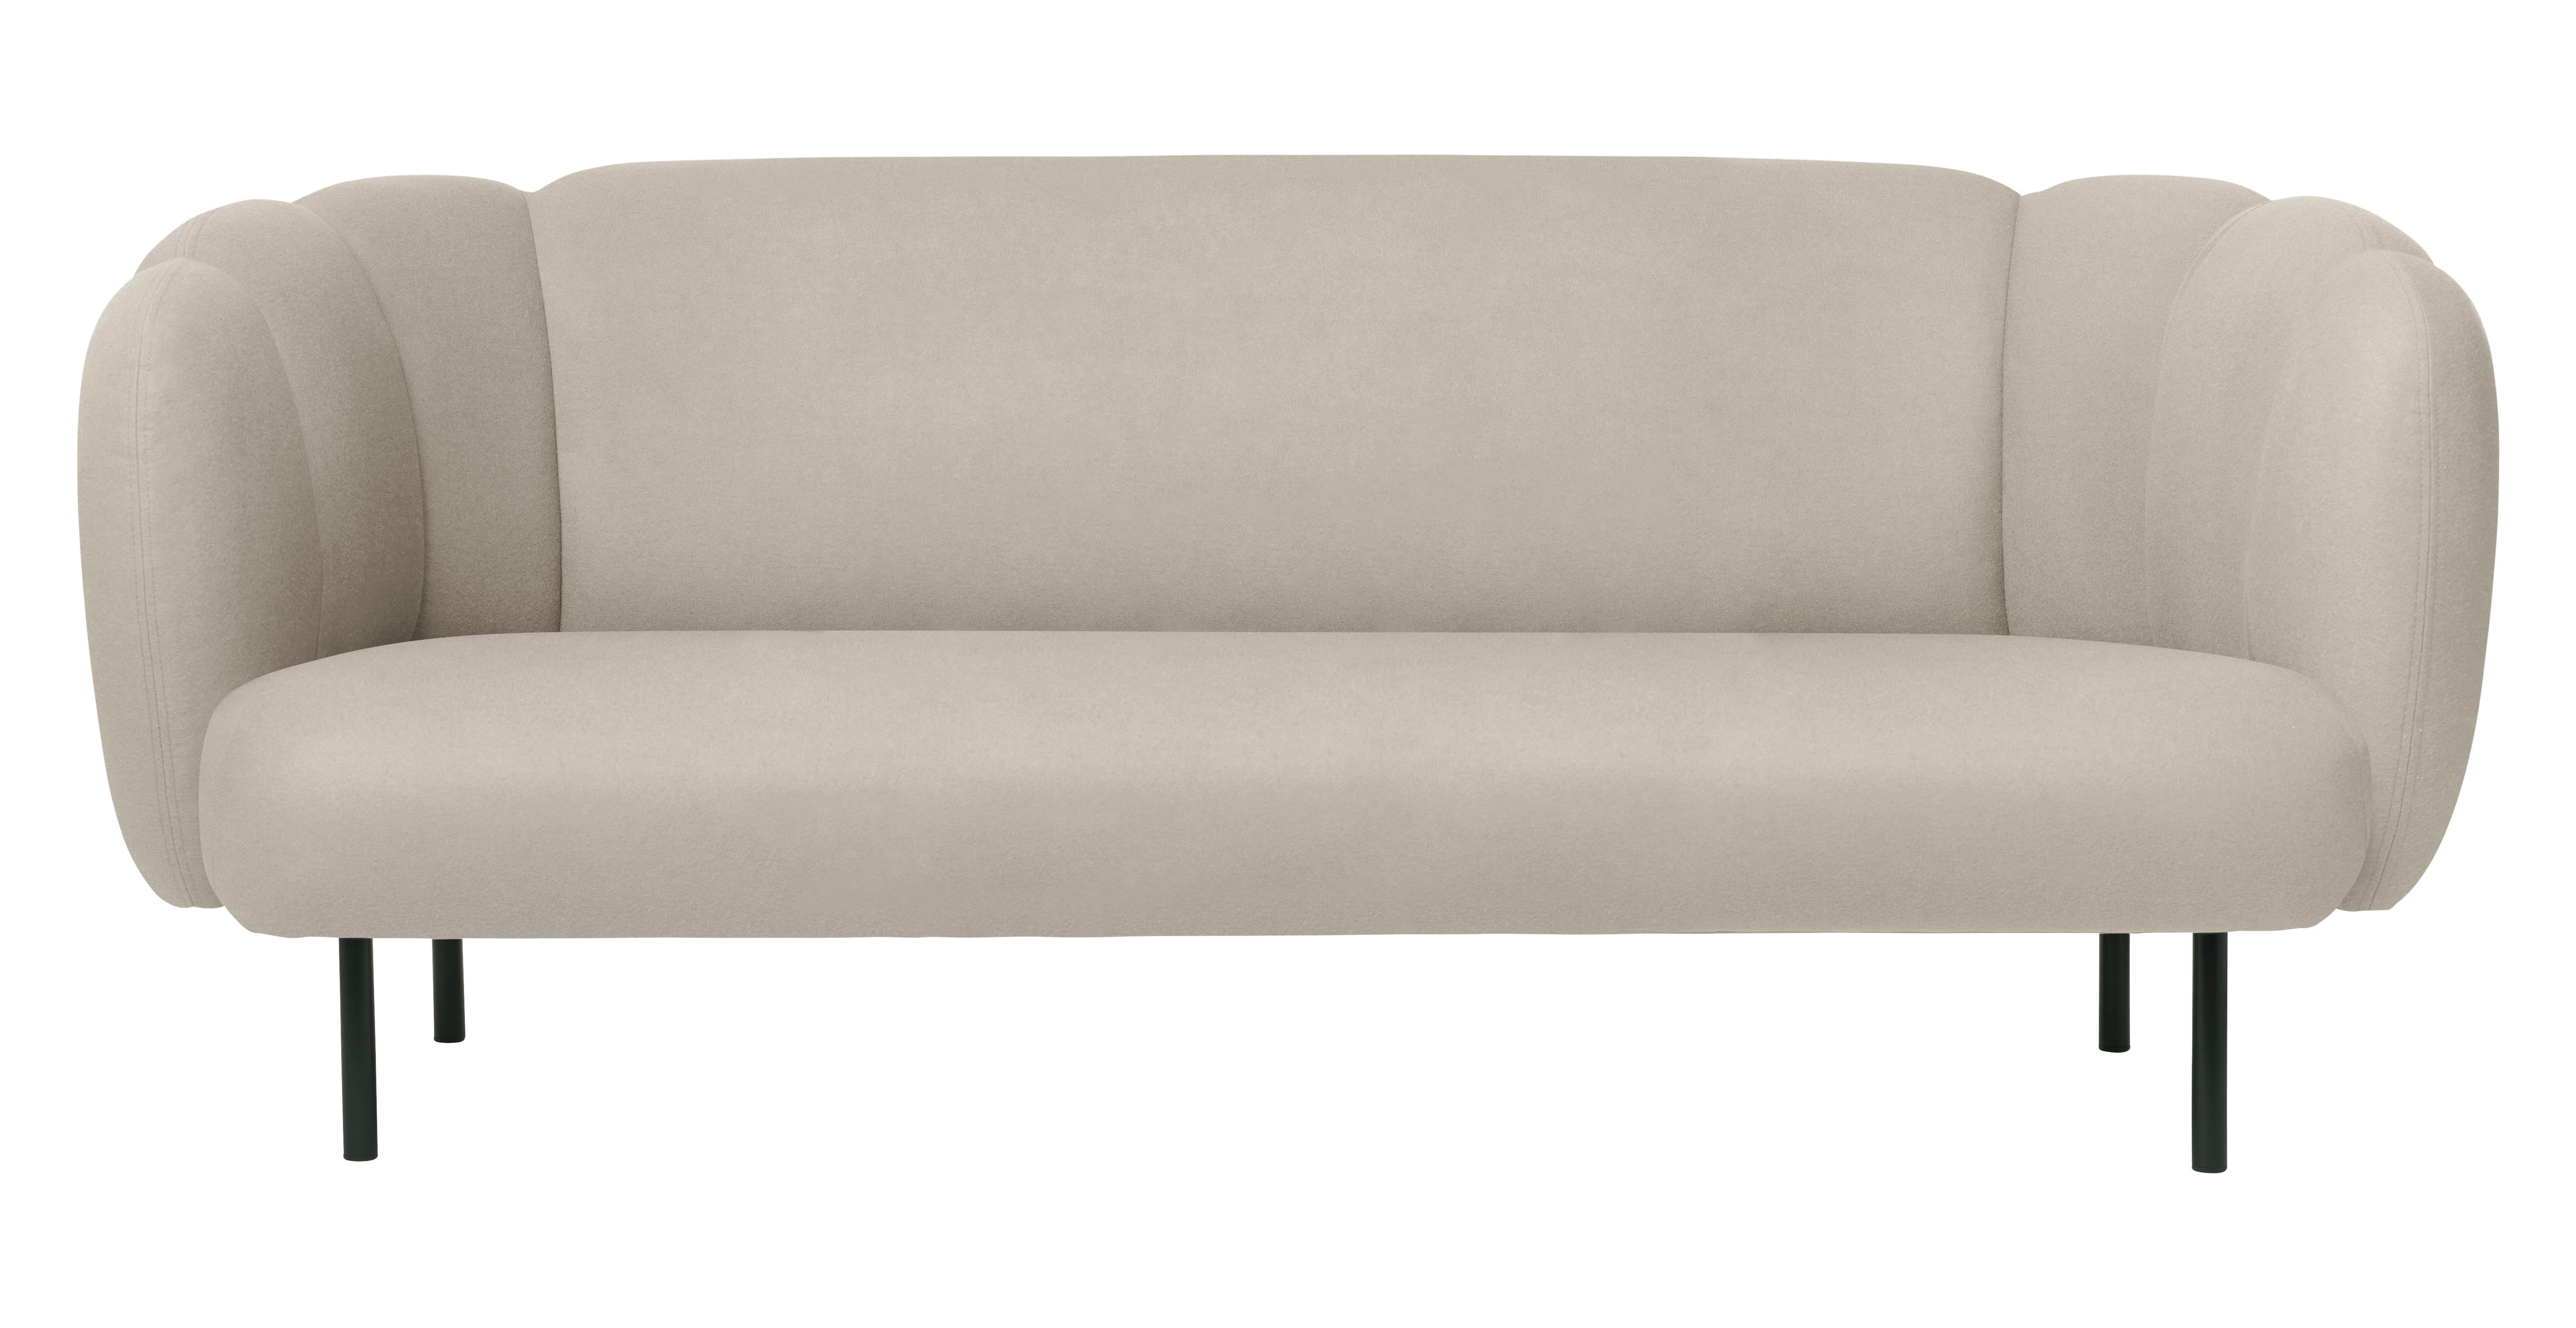 For Sale: Gray (Hero 211) Cape 3-Seat Stitch Sofa, by Charlotte Høncke from Warm Nordic